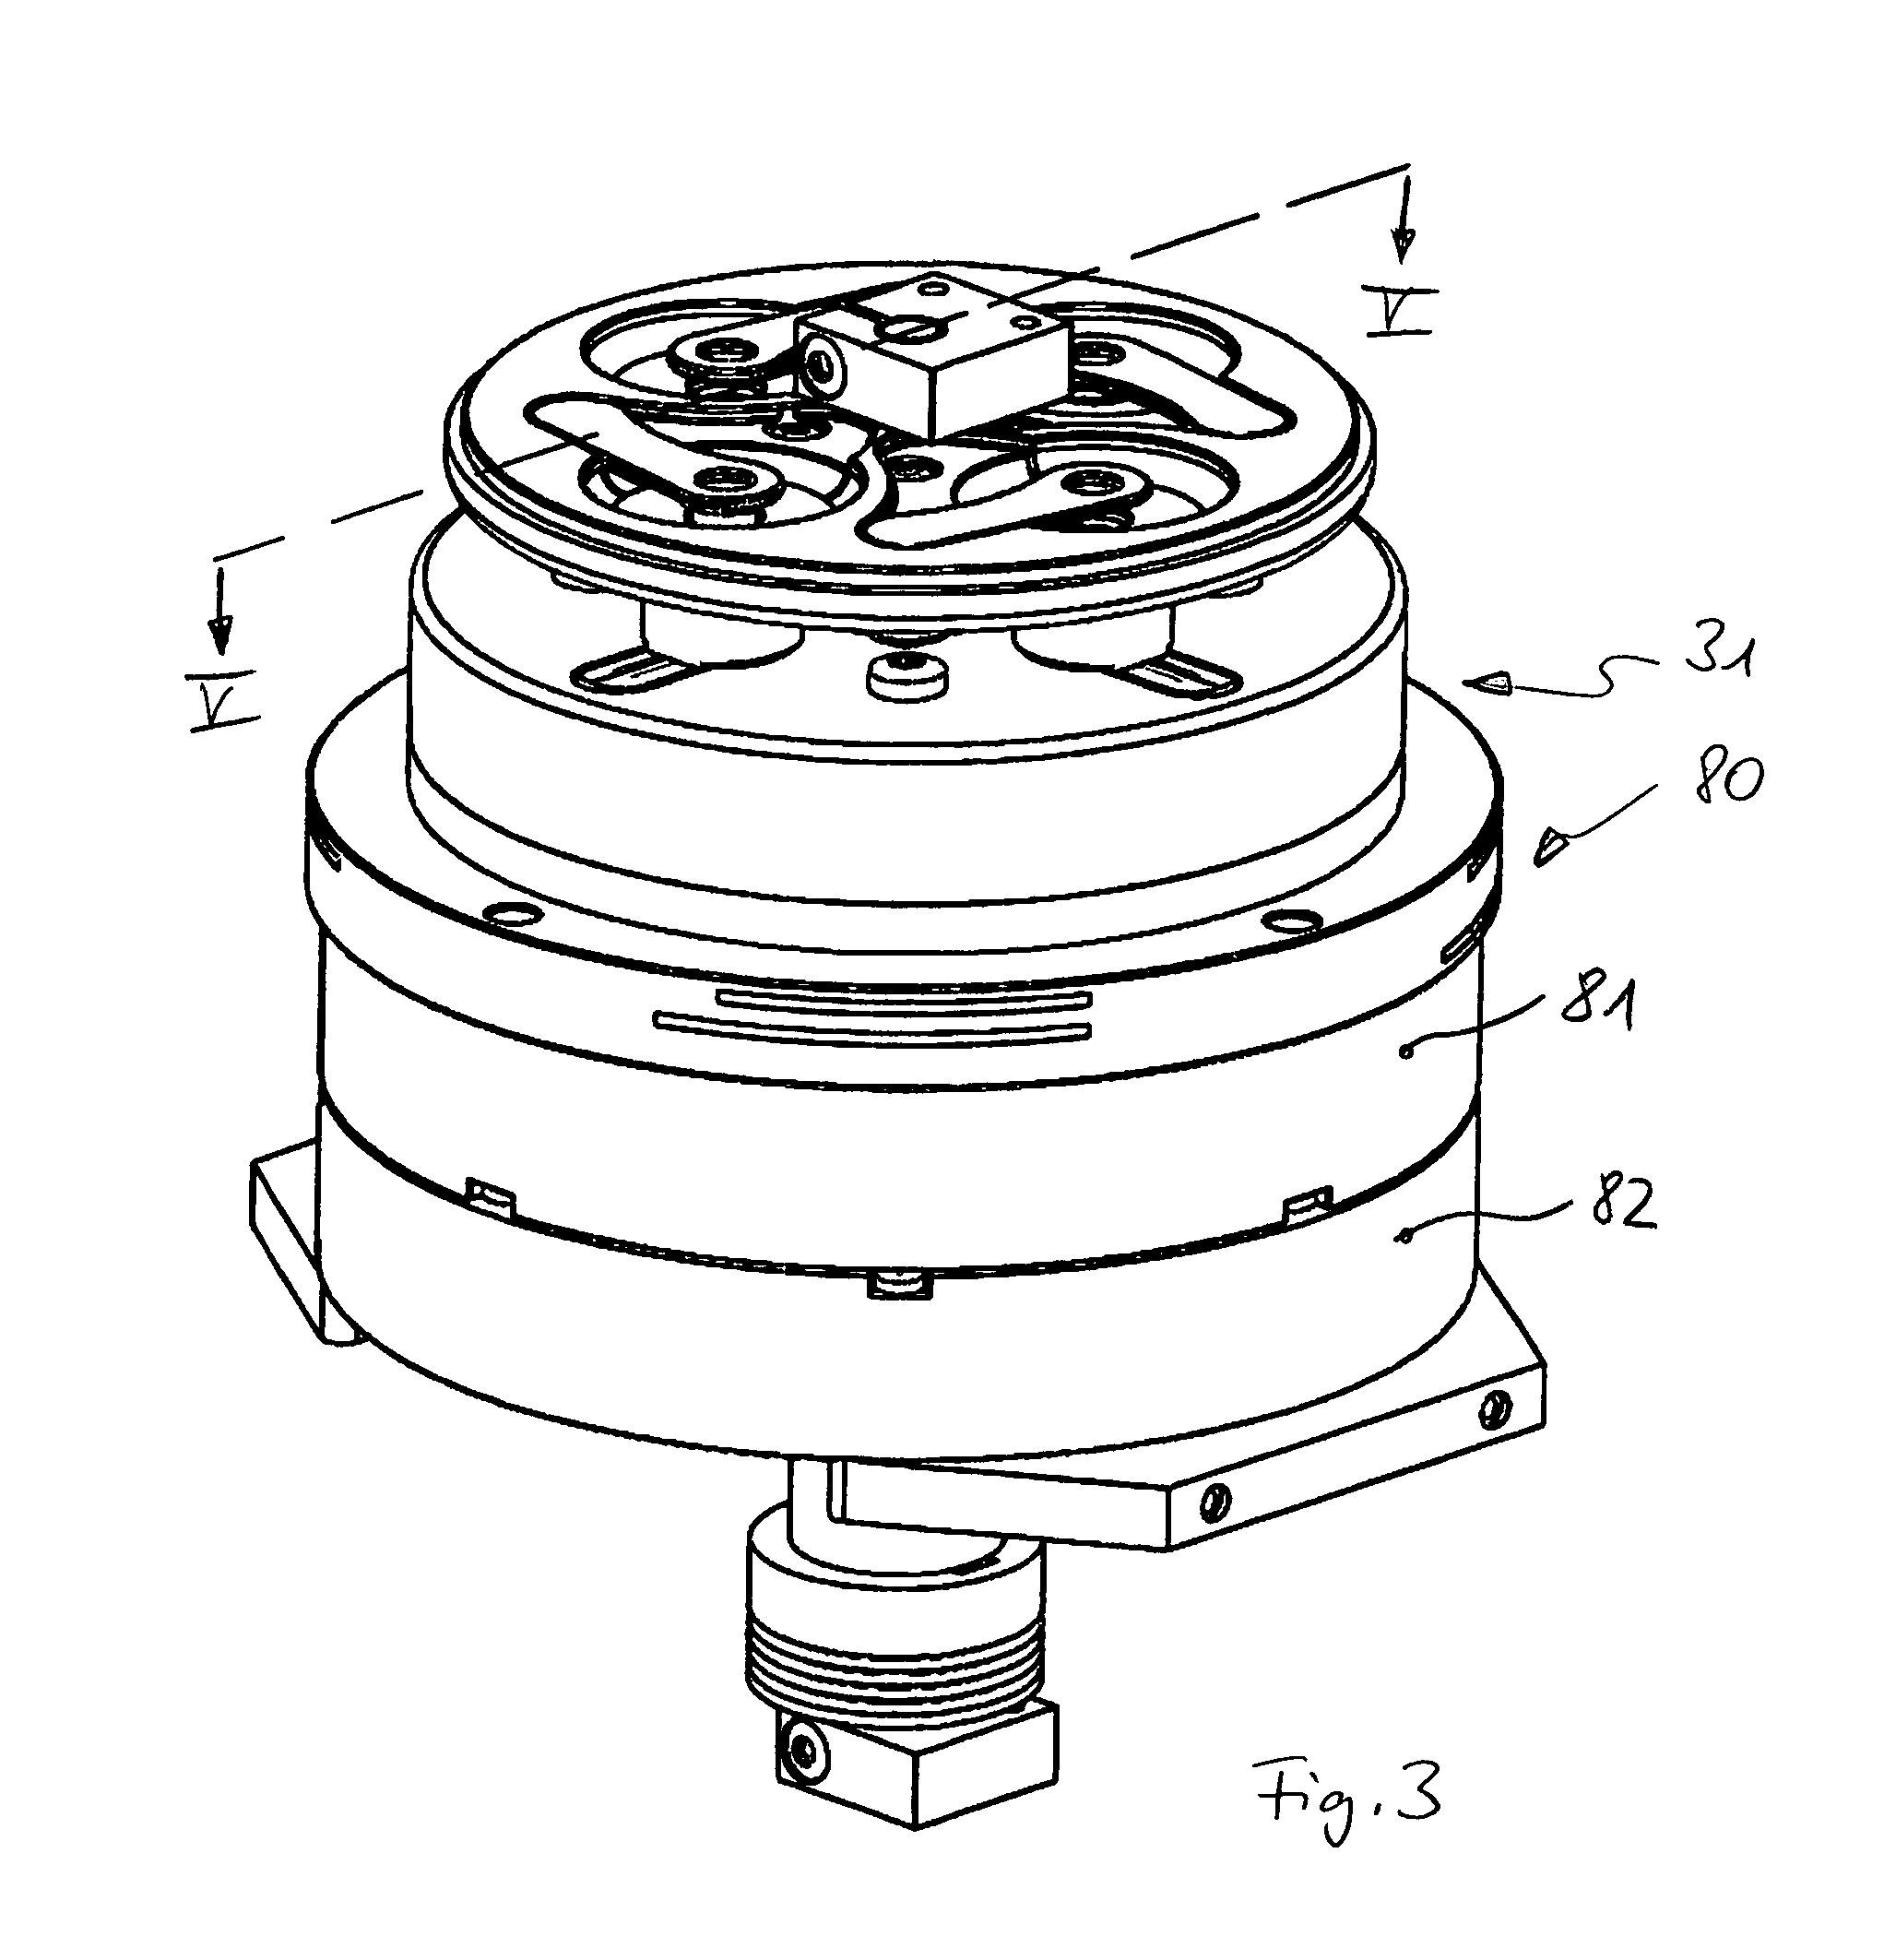 Apparatus and method for a lysis of a sample, in particular for an automated and/or controlled lysis of a sample